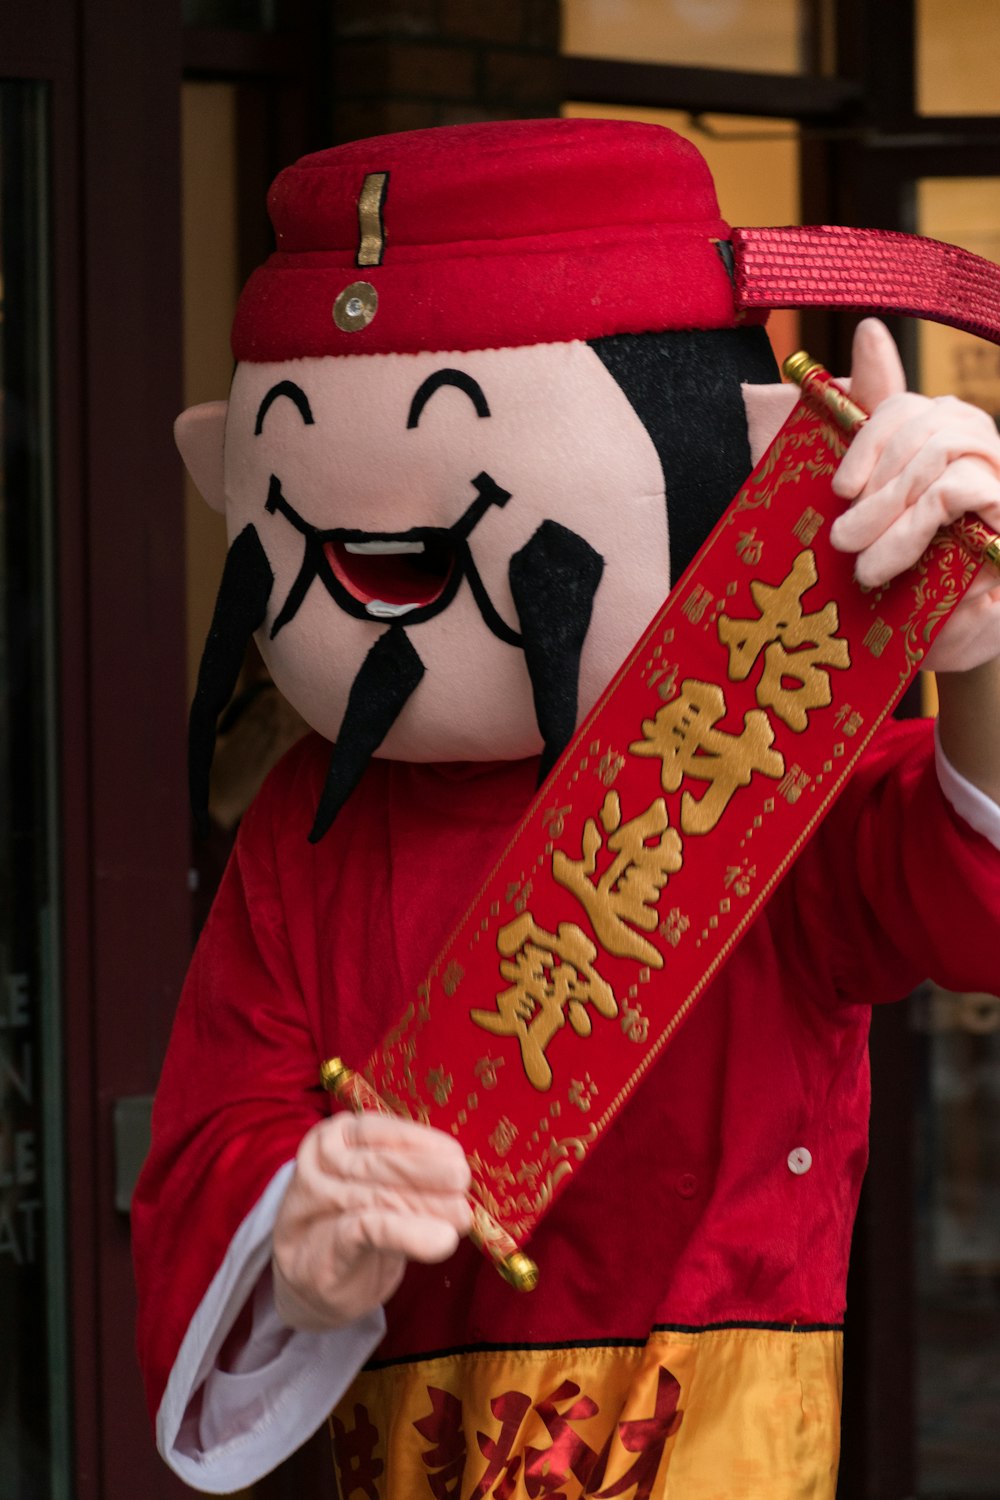 a person in a red and gold outfit holding a red box